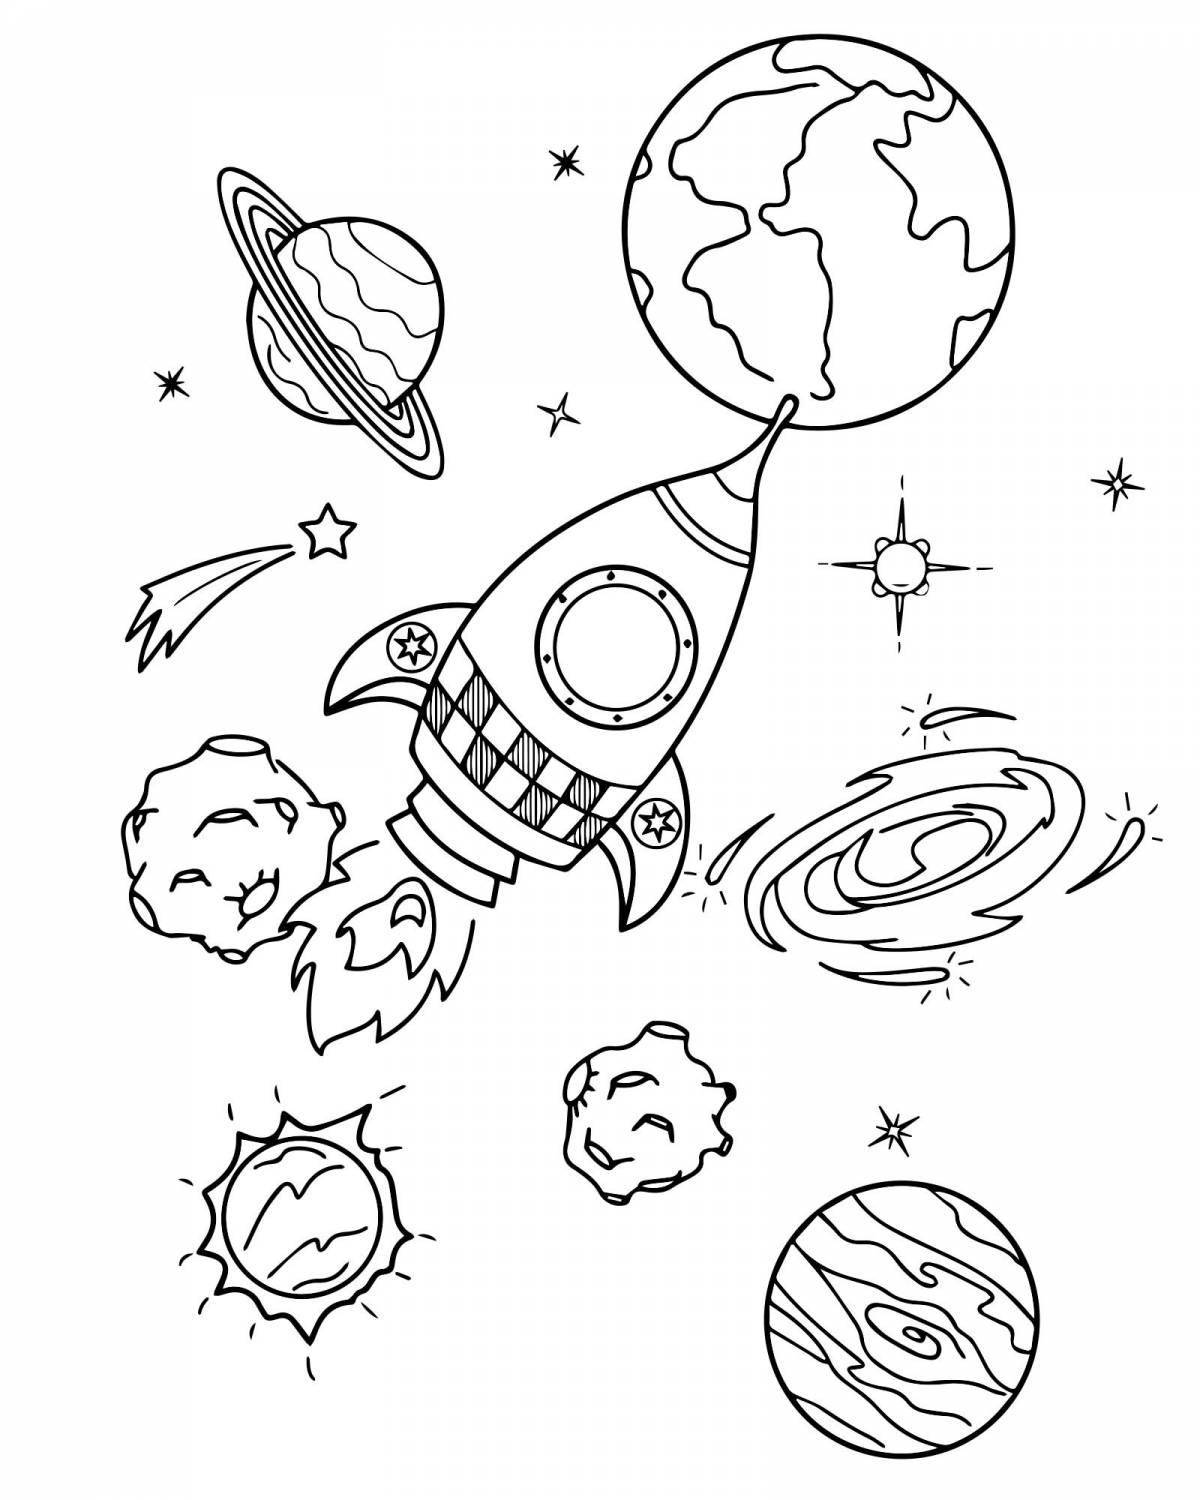 Sky space coloring page